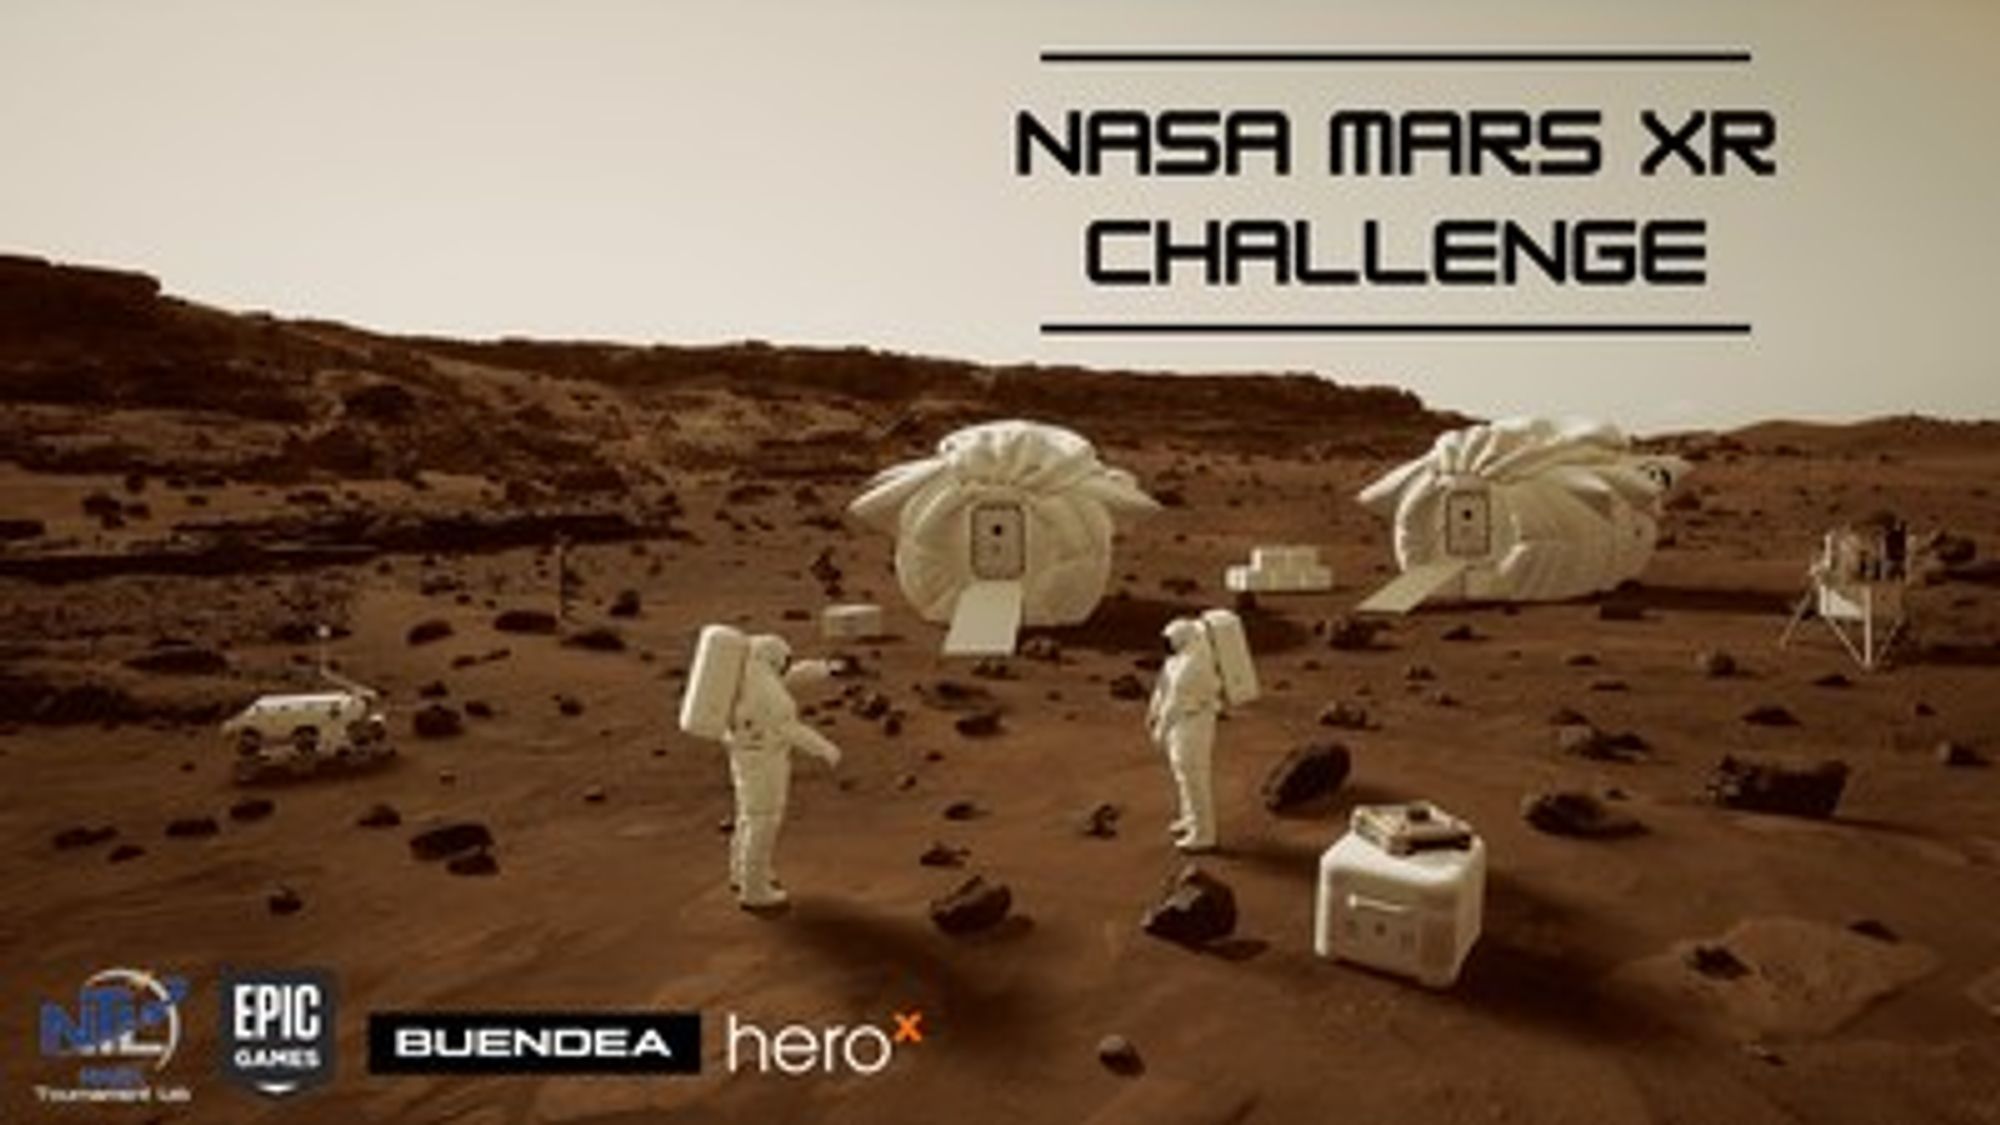 NASA Teams Up with Epic Games and HeroX to Source VR Technology for Future Mars Exploration